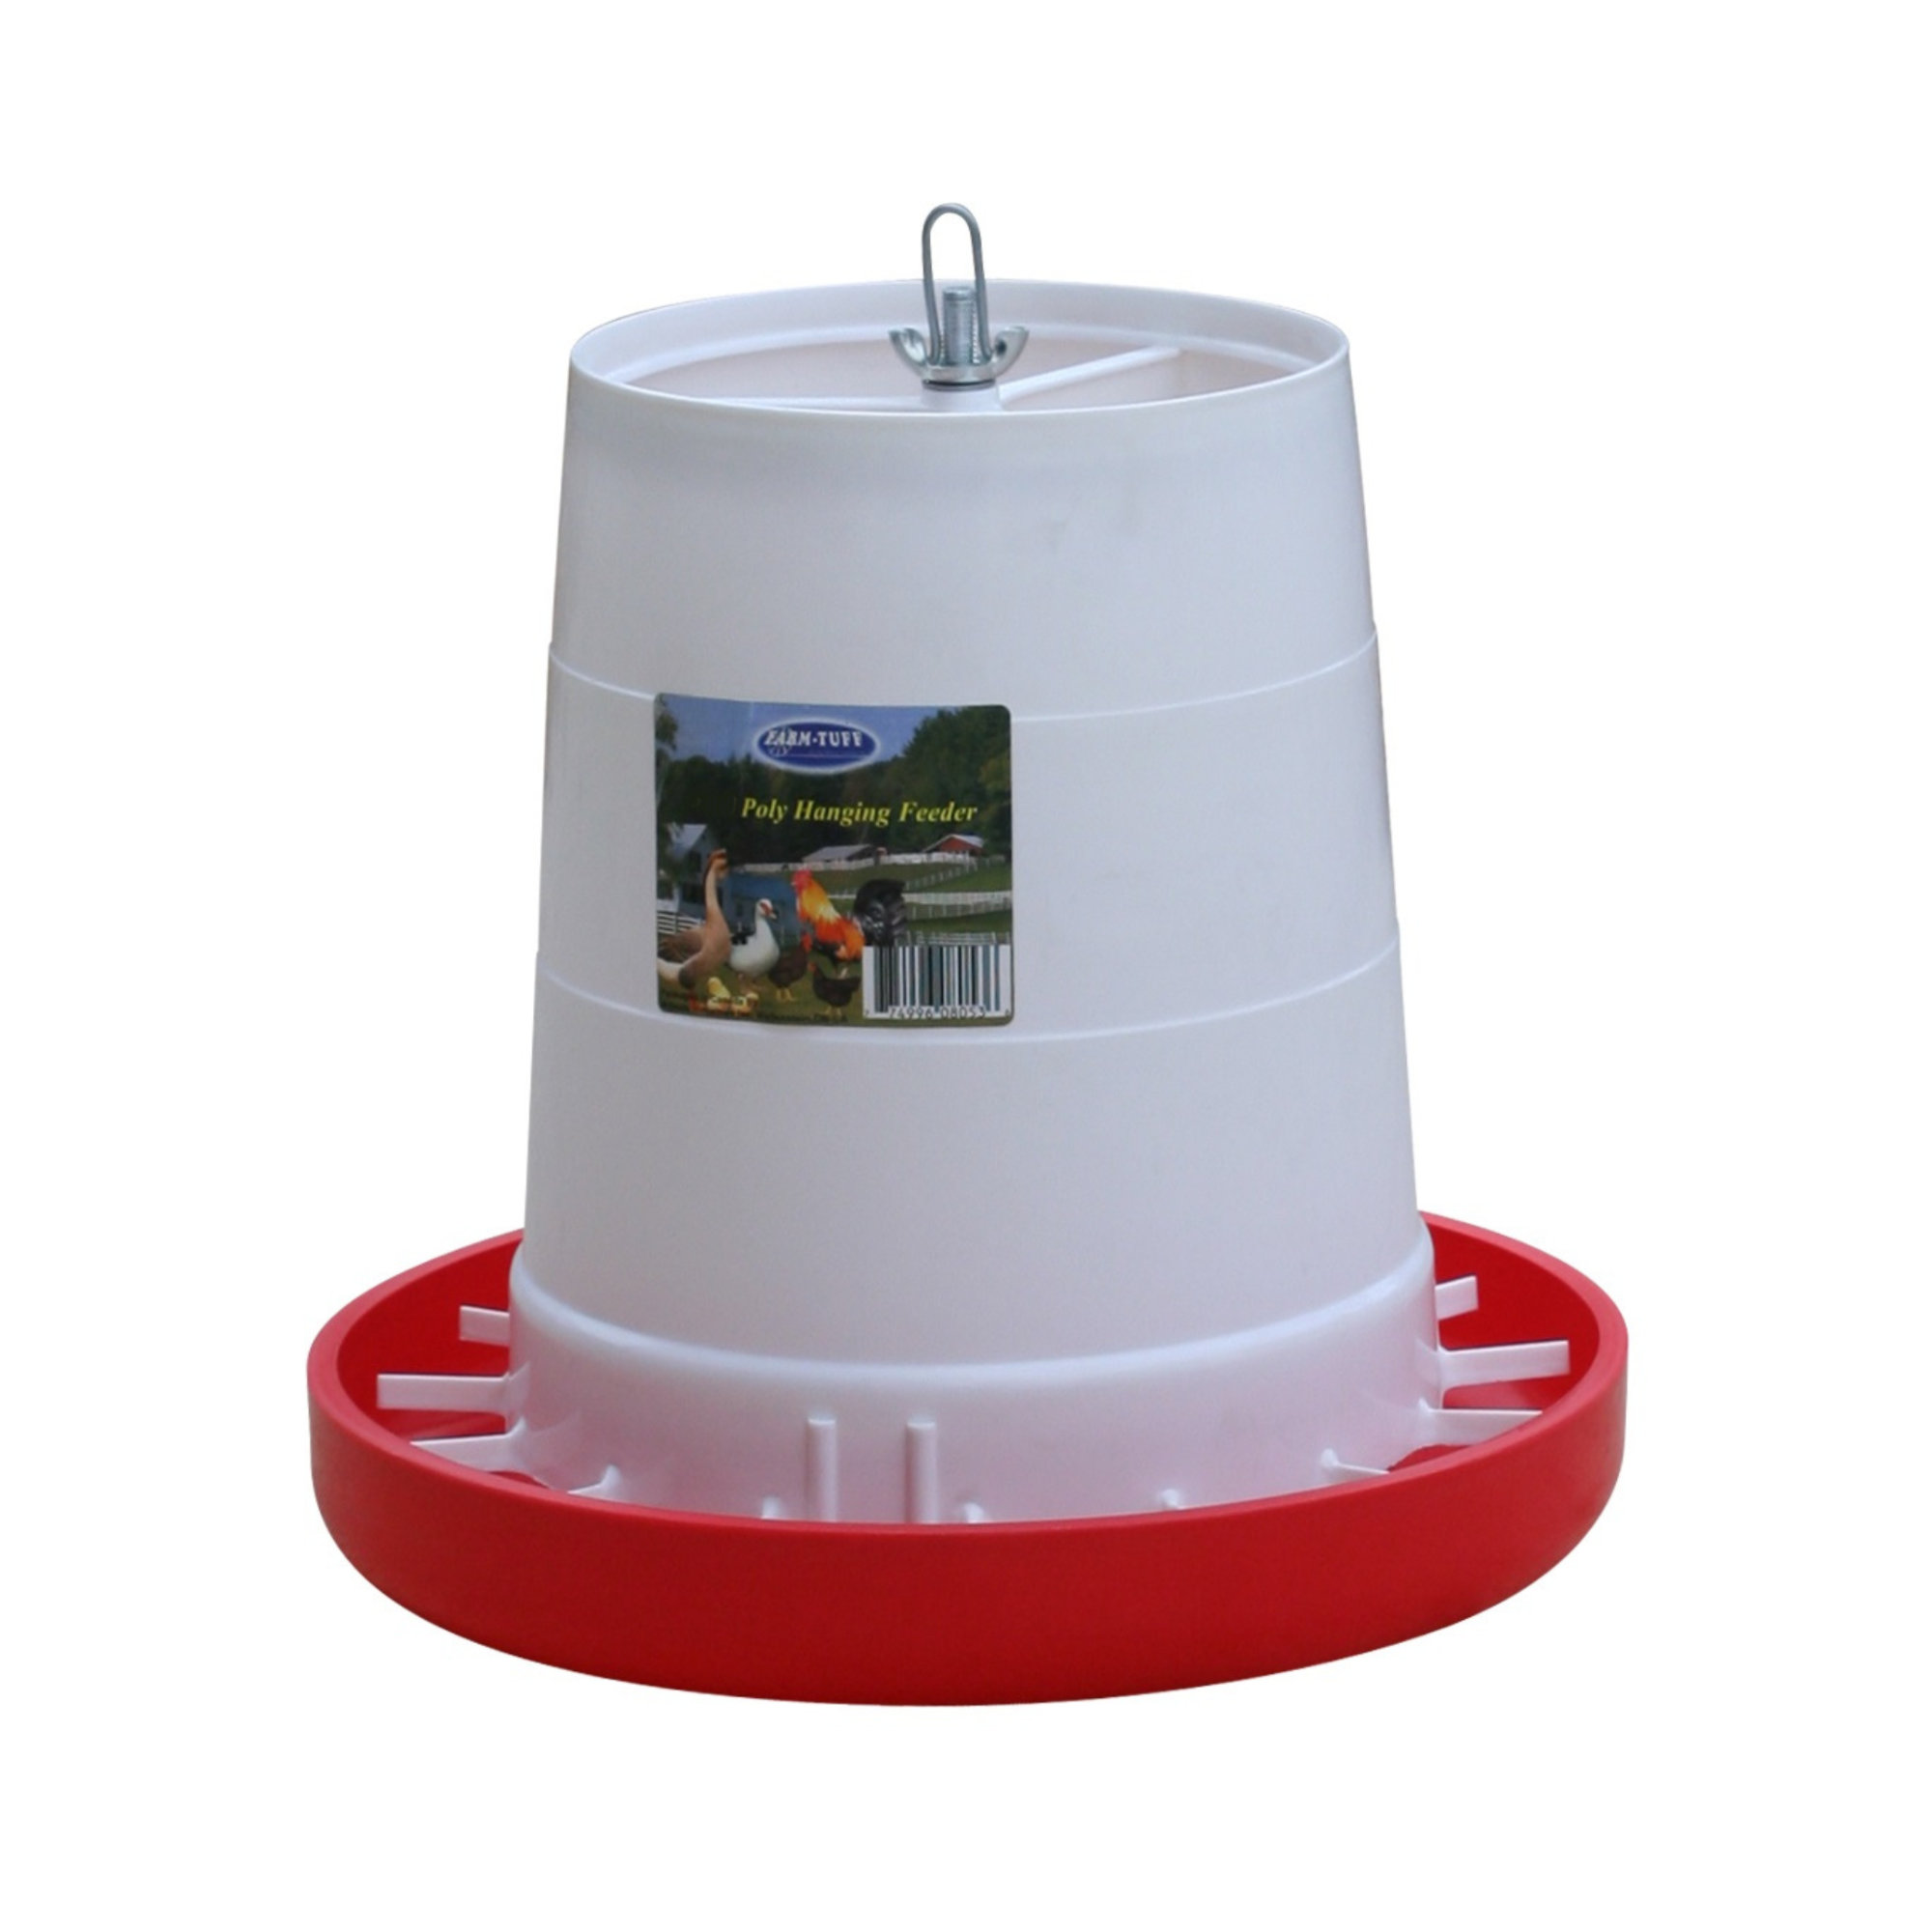 Farm Tuff Durable Outdoor Hanging Plastic Automatic Poultry Feeder with Customizable Flow Rates for Chickens